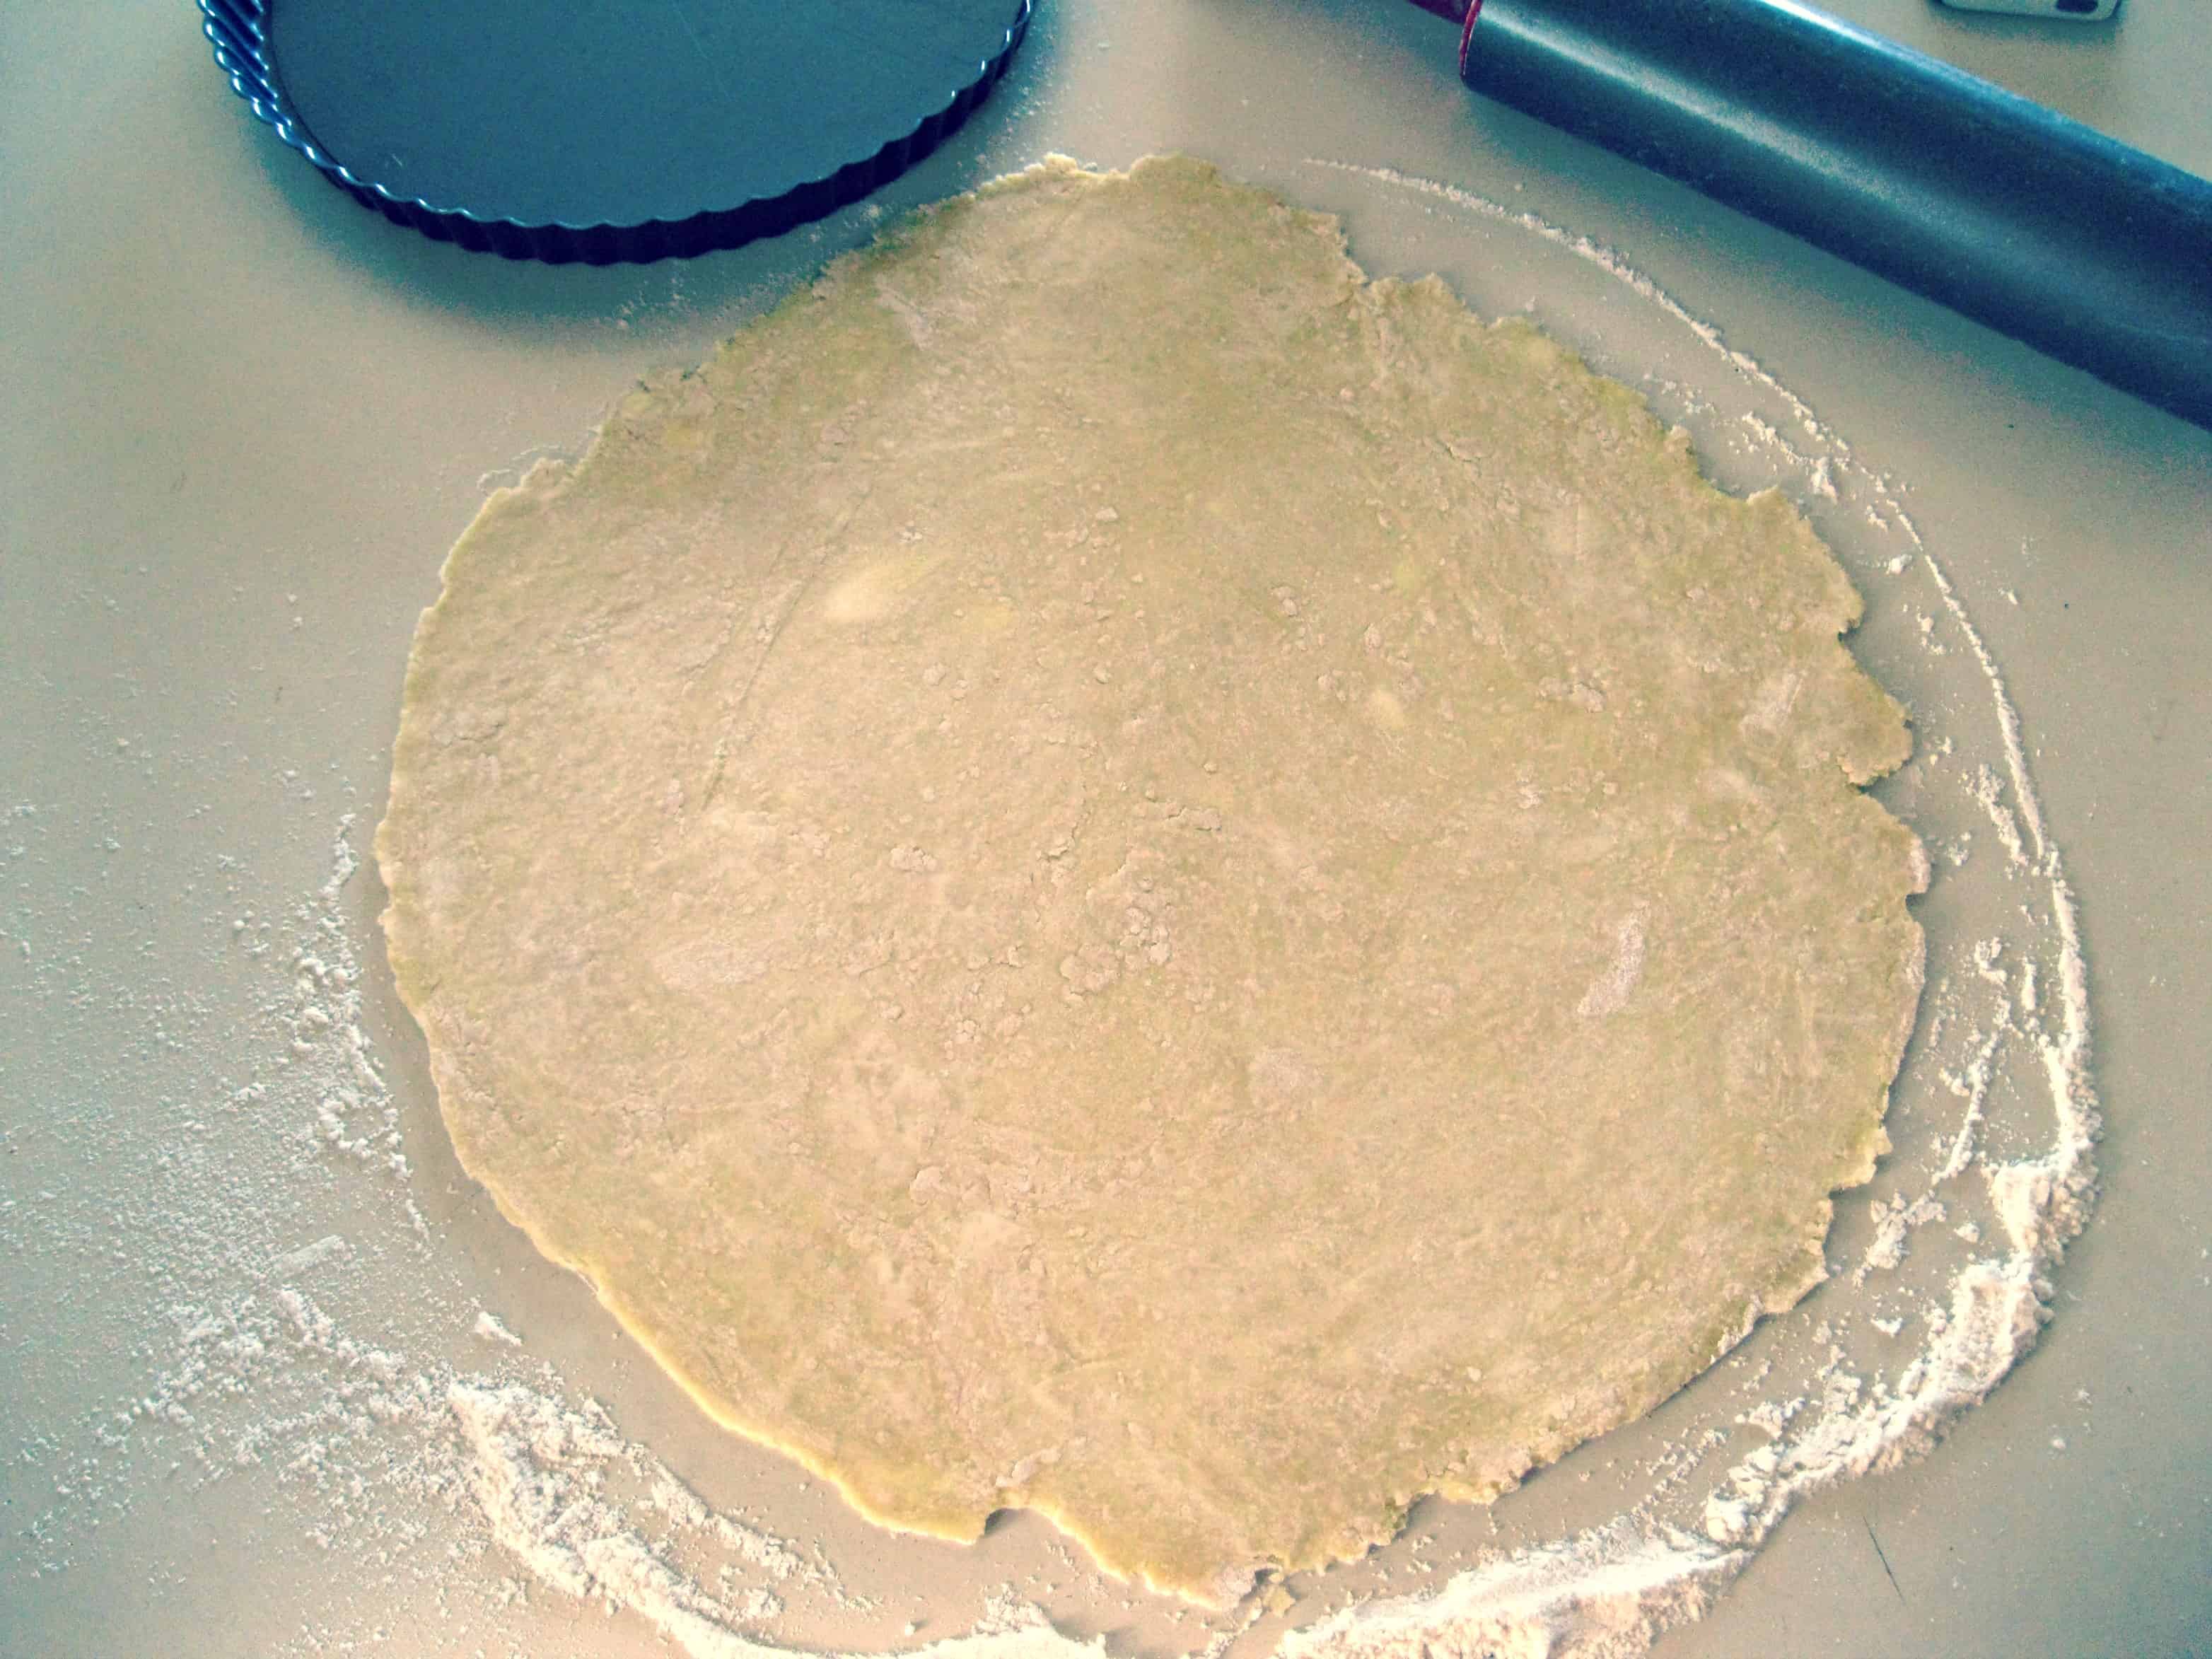 Pie dough rolled out in a circle on a floured counter.